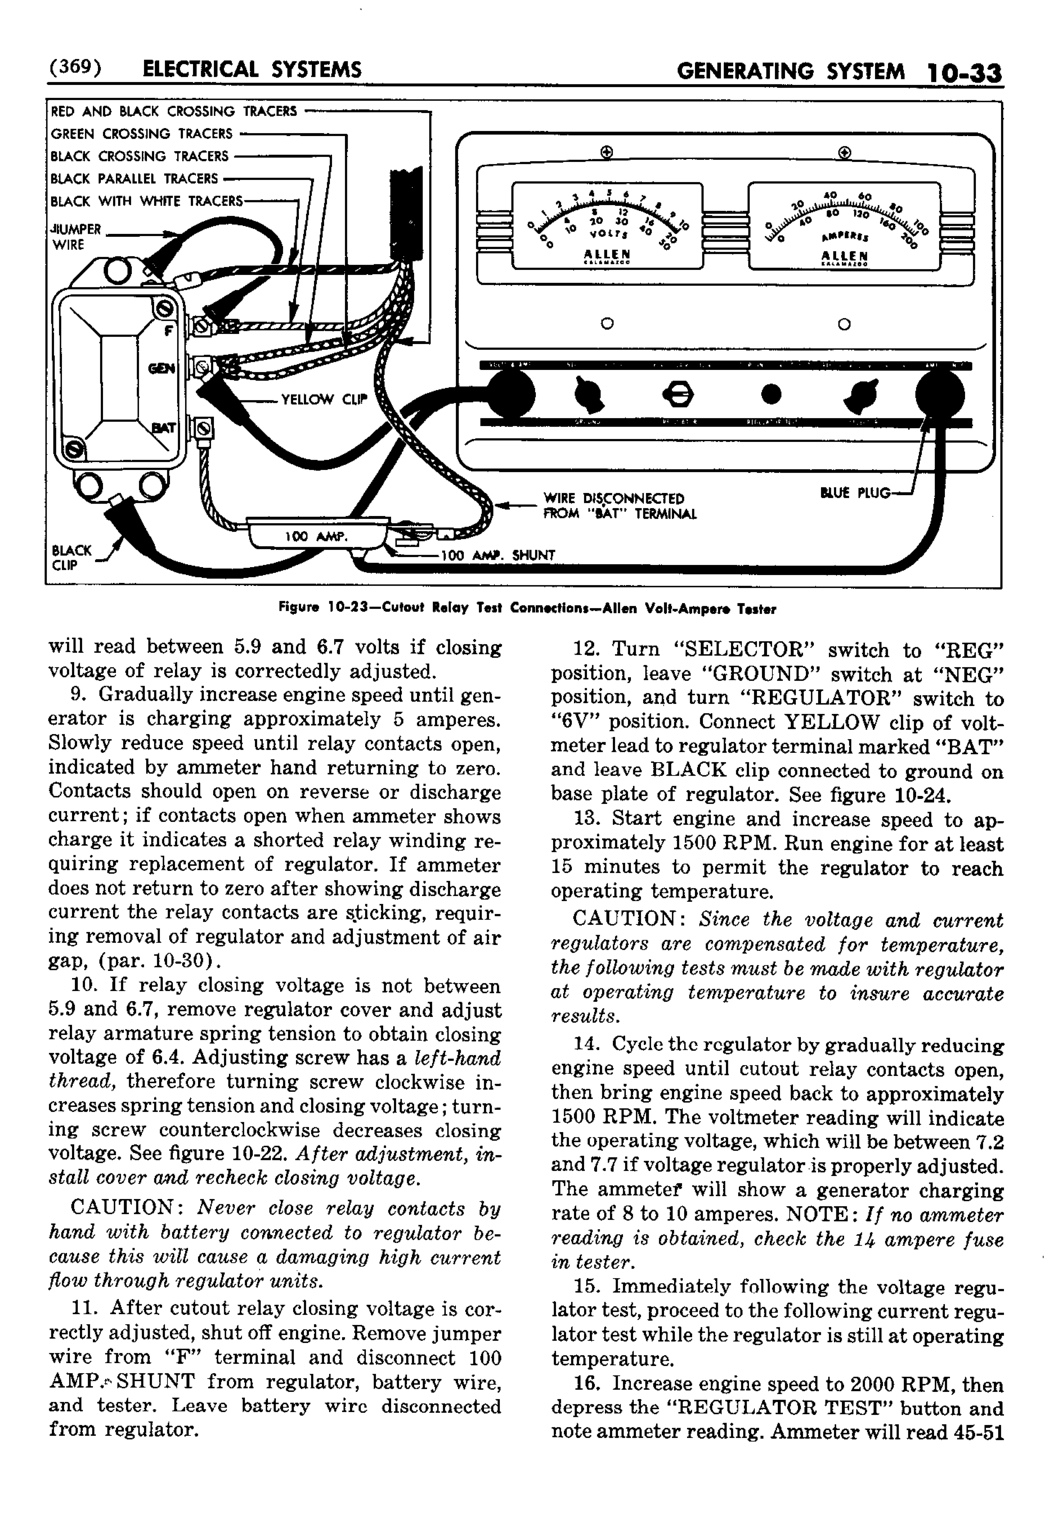 n_11 1952 Buick Shop Manual - Electrical Systems-033-033.jpg